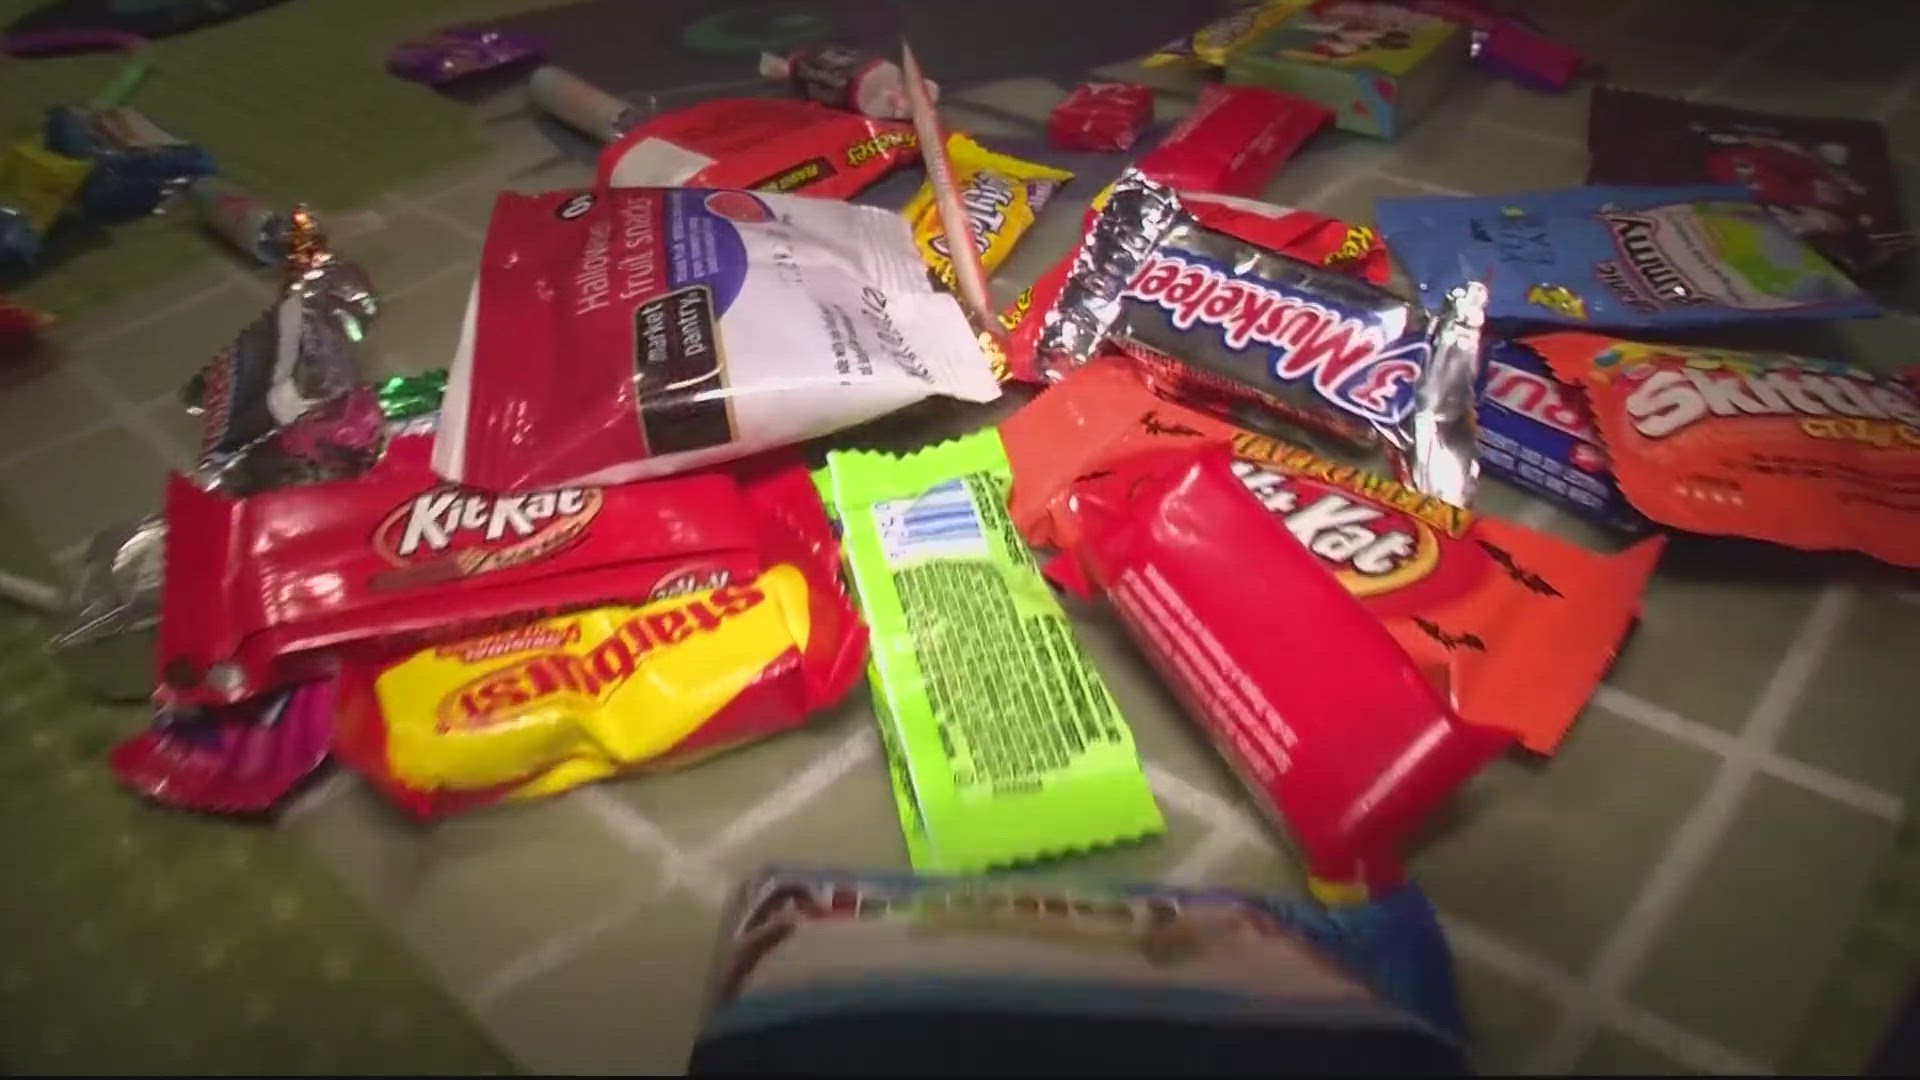 A  local expert weighs in on just how much candy is too much this Halloween.